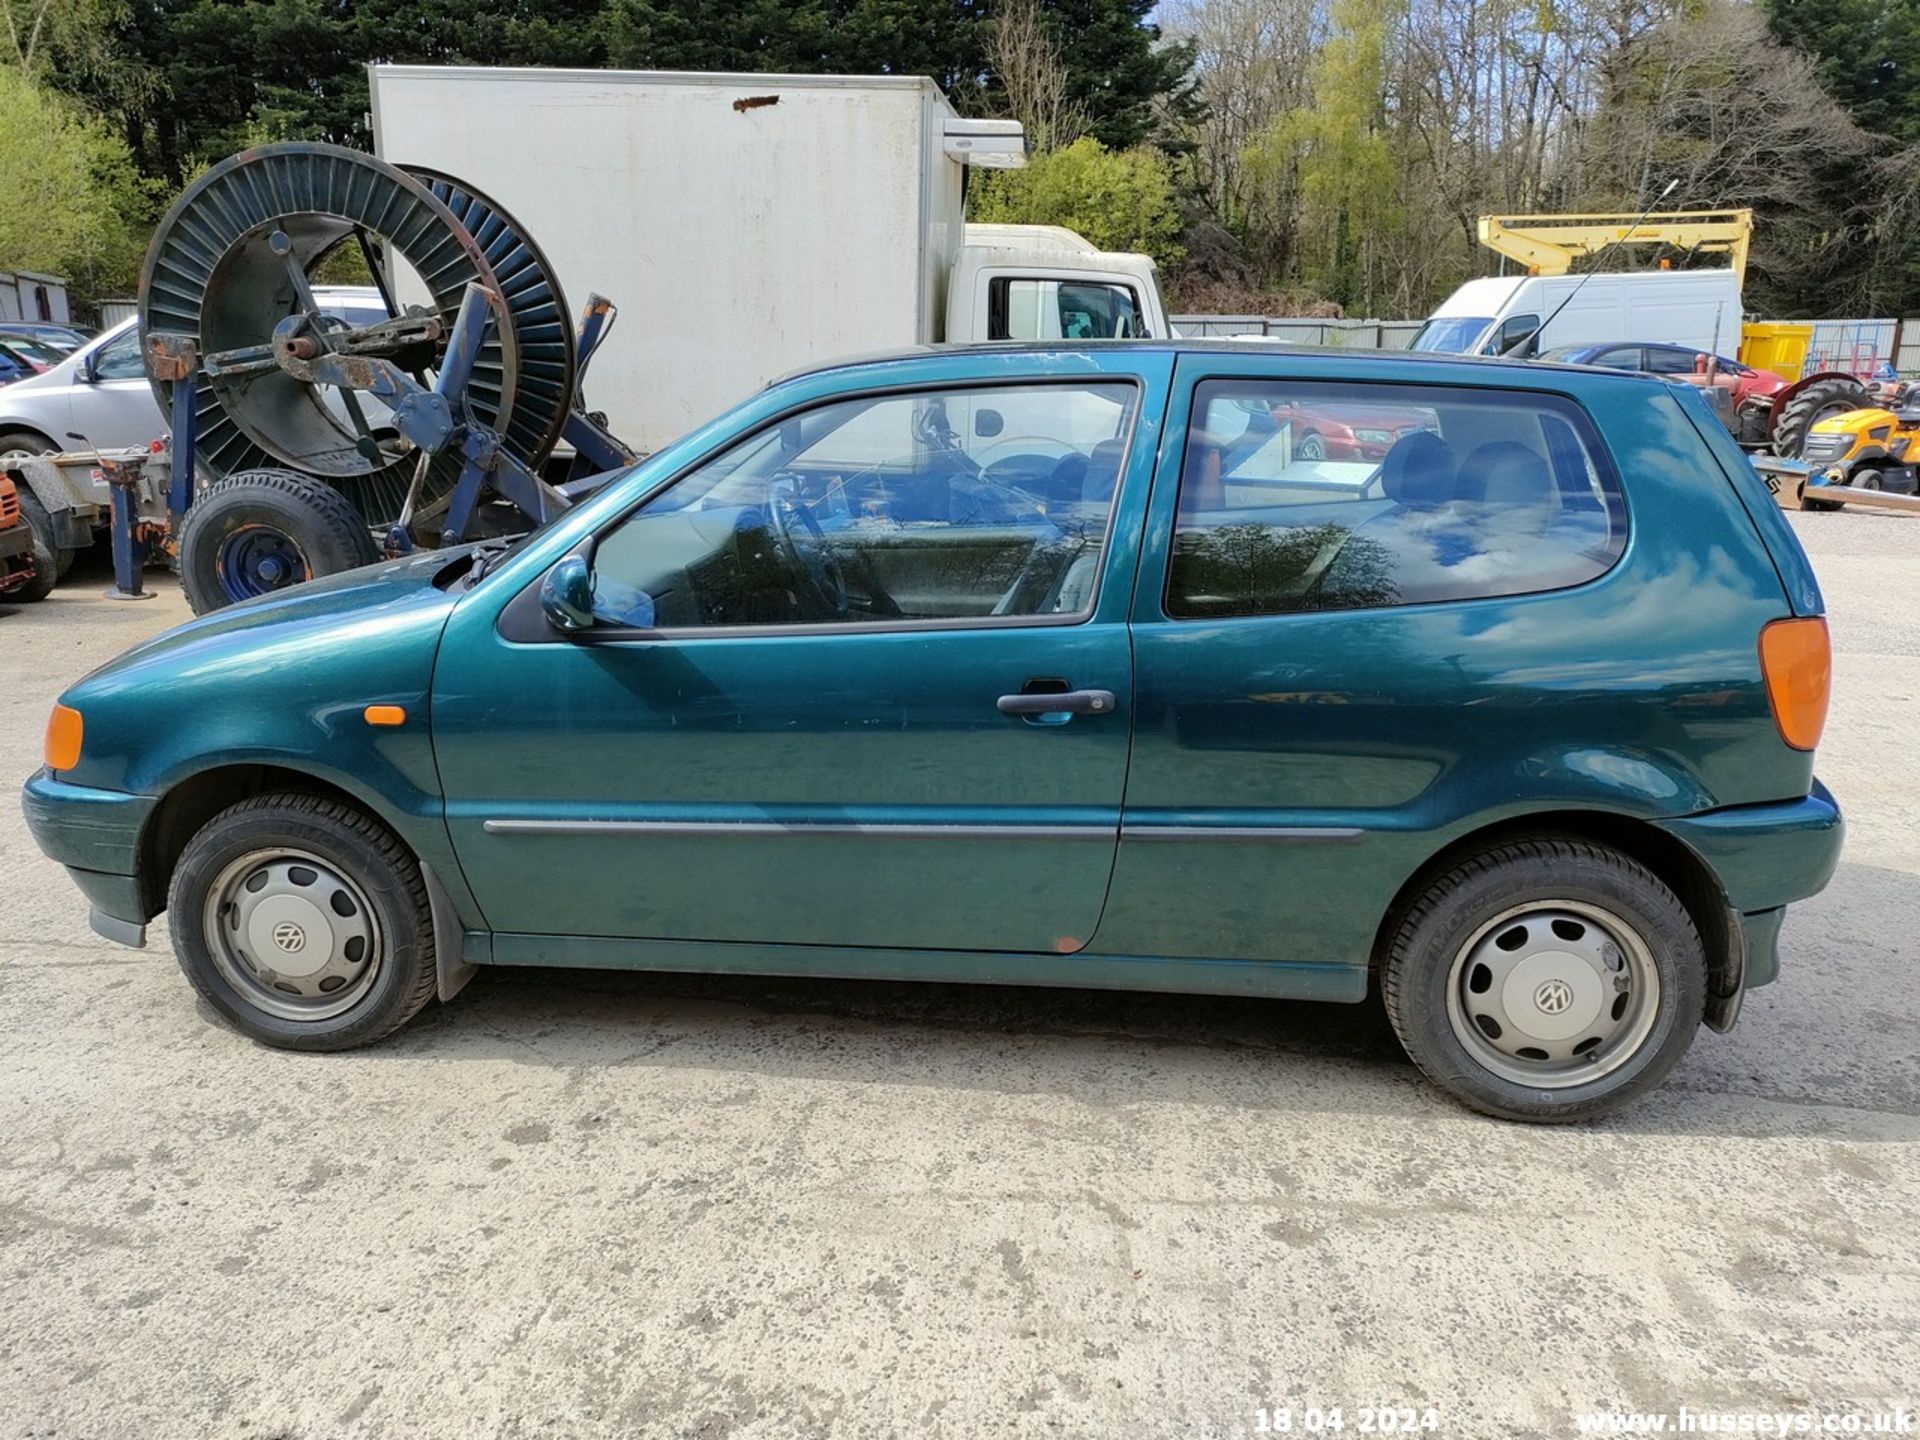 1997 VOLKSWAGEN POLO 1.4 CL AUTO - 1390cc 3dr Hatchback (Green, 68k) - Image 18 of 60